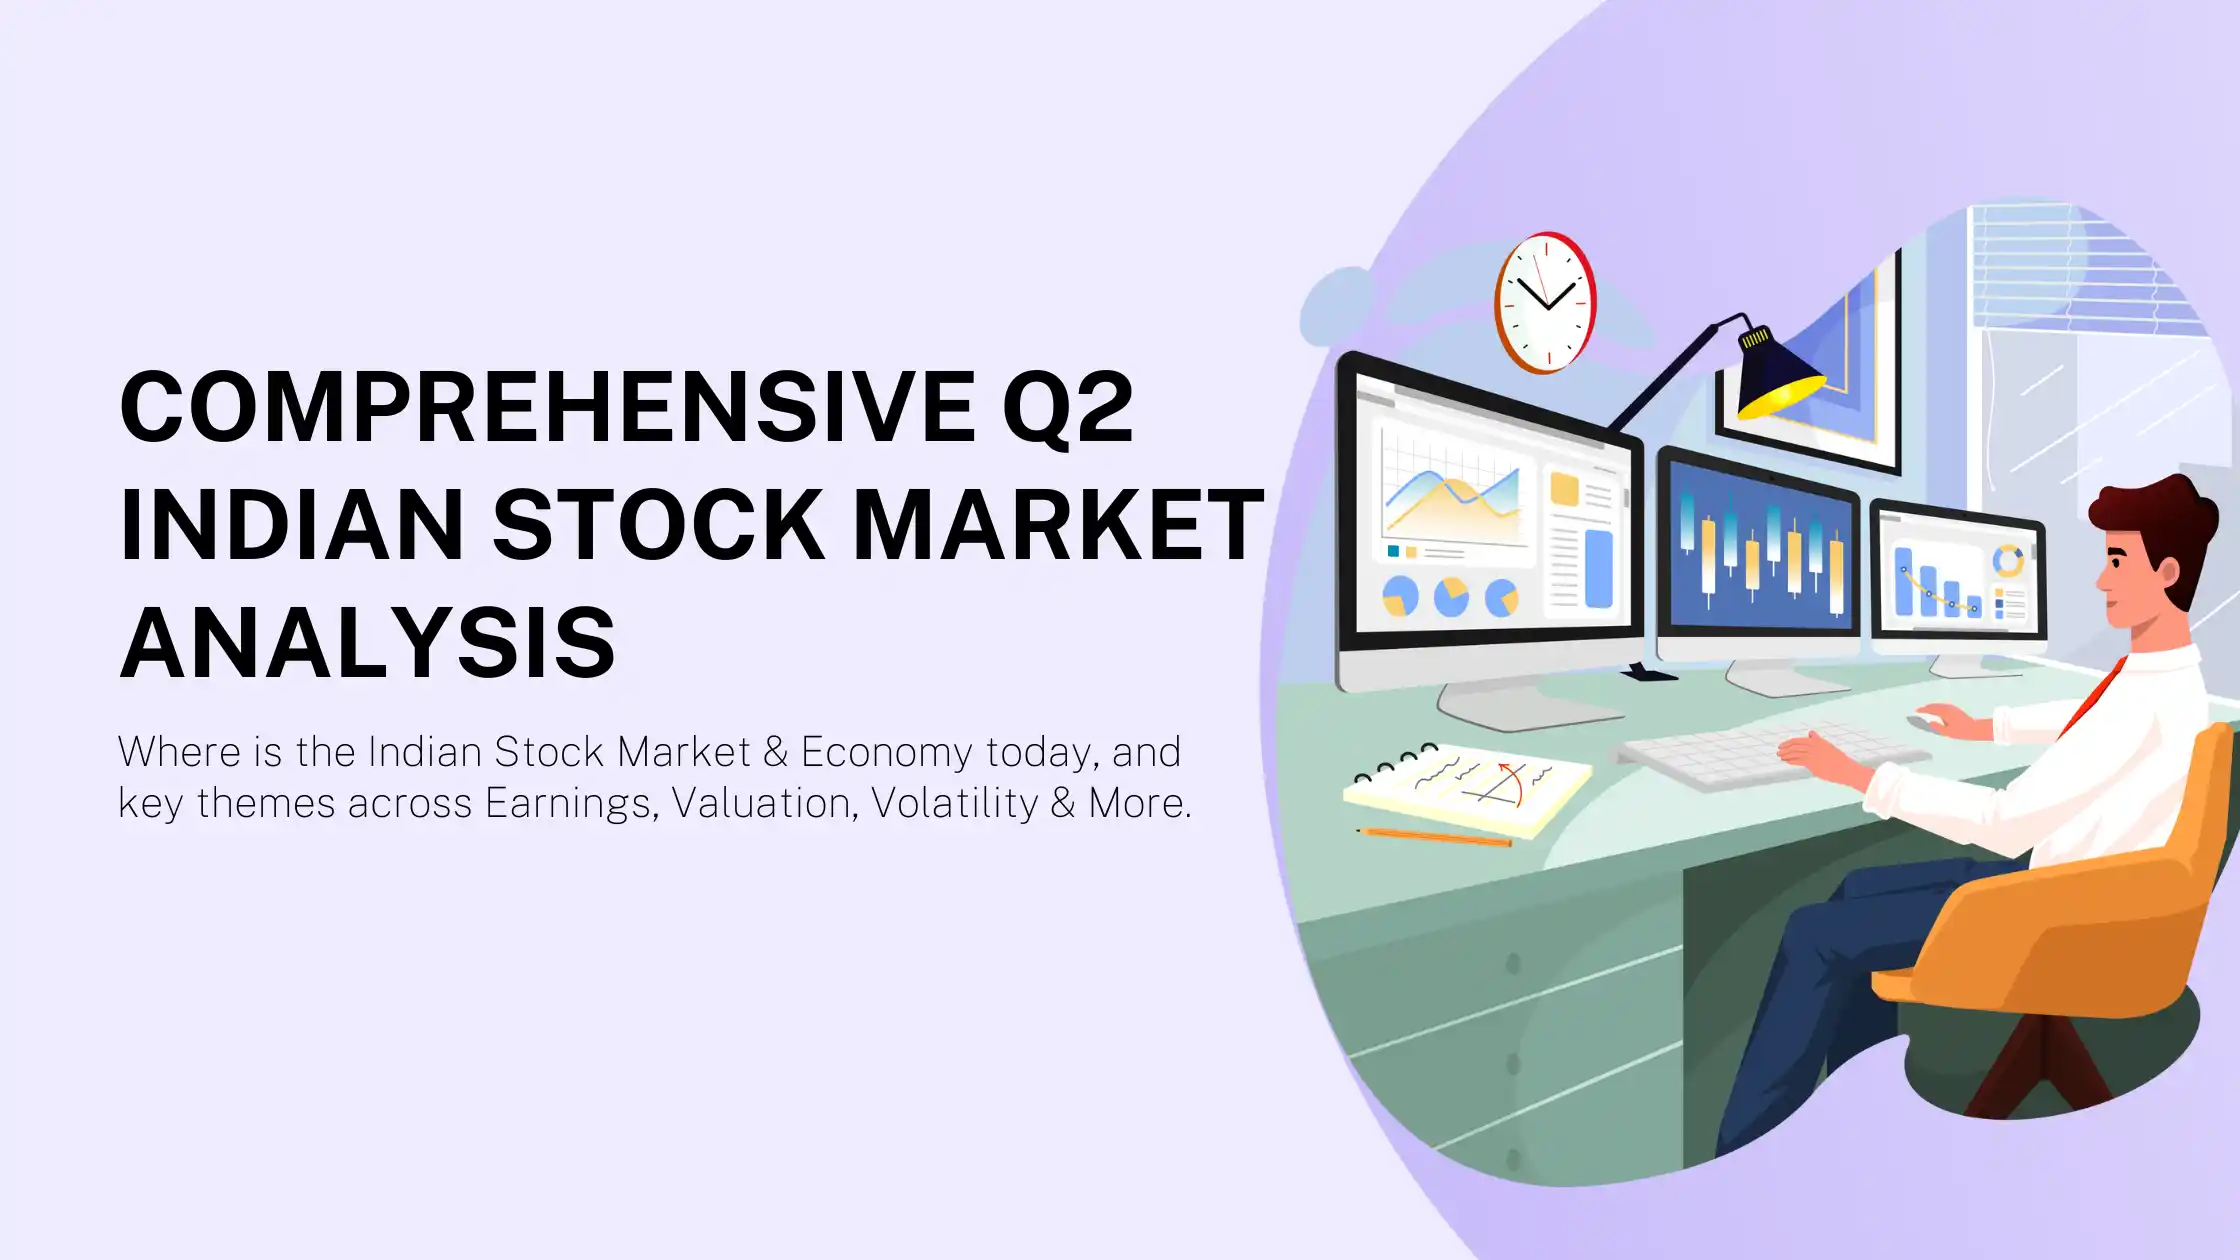 Comprehensive Q2 Indian Stock Market Analysis: Earnings, Market Valuation, Volatility, Trends & More